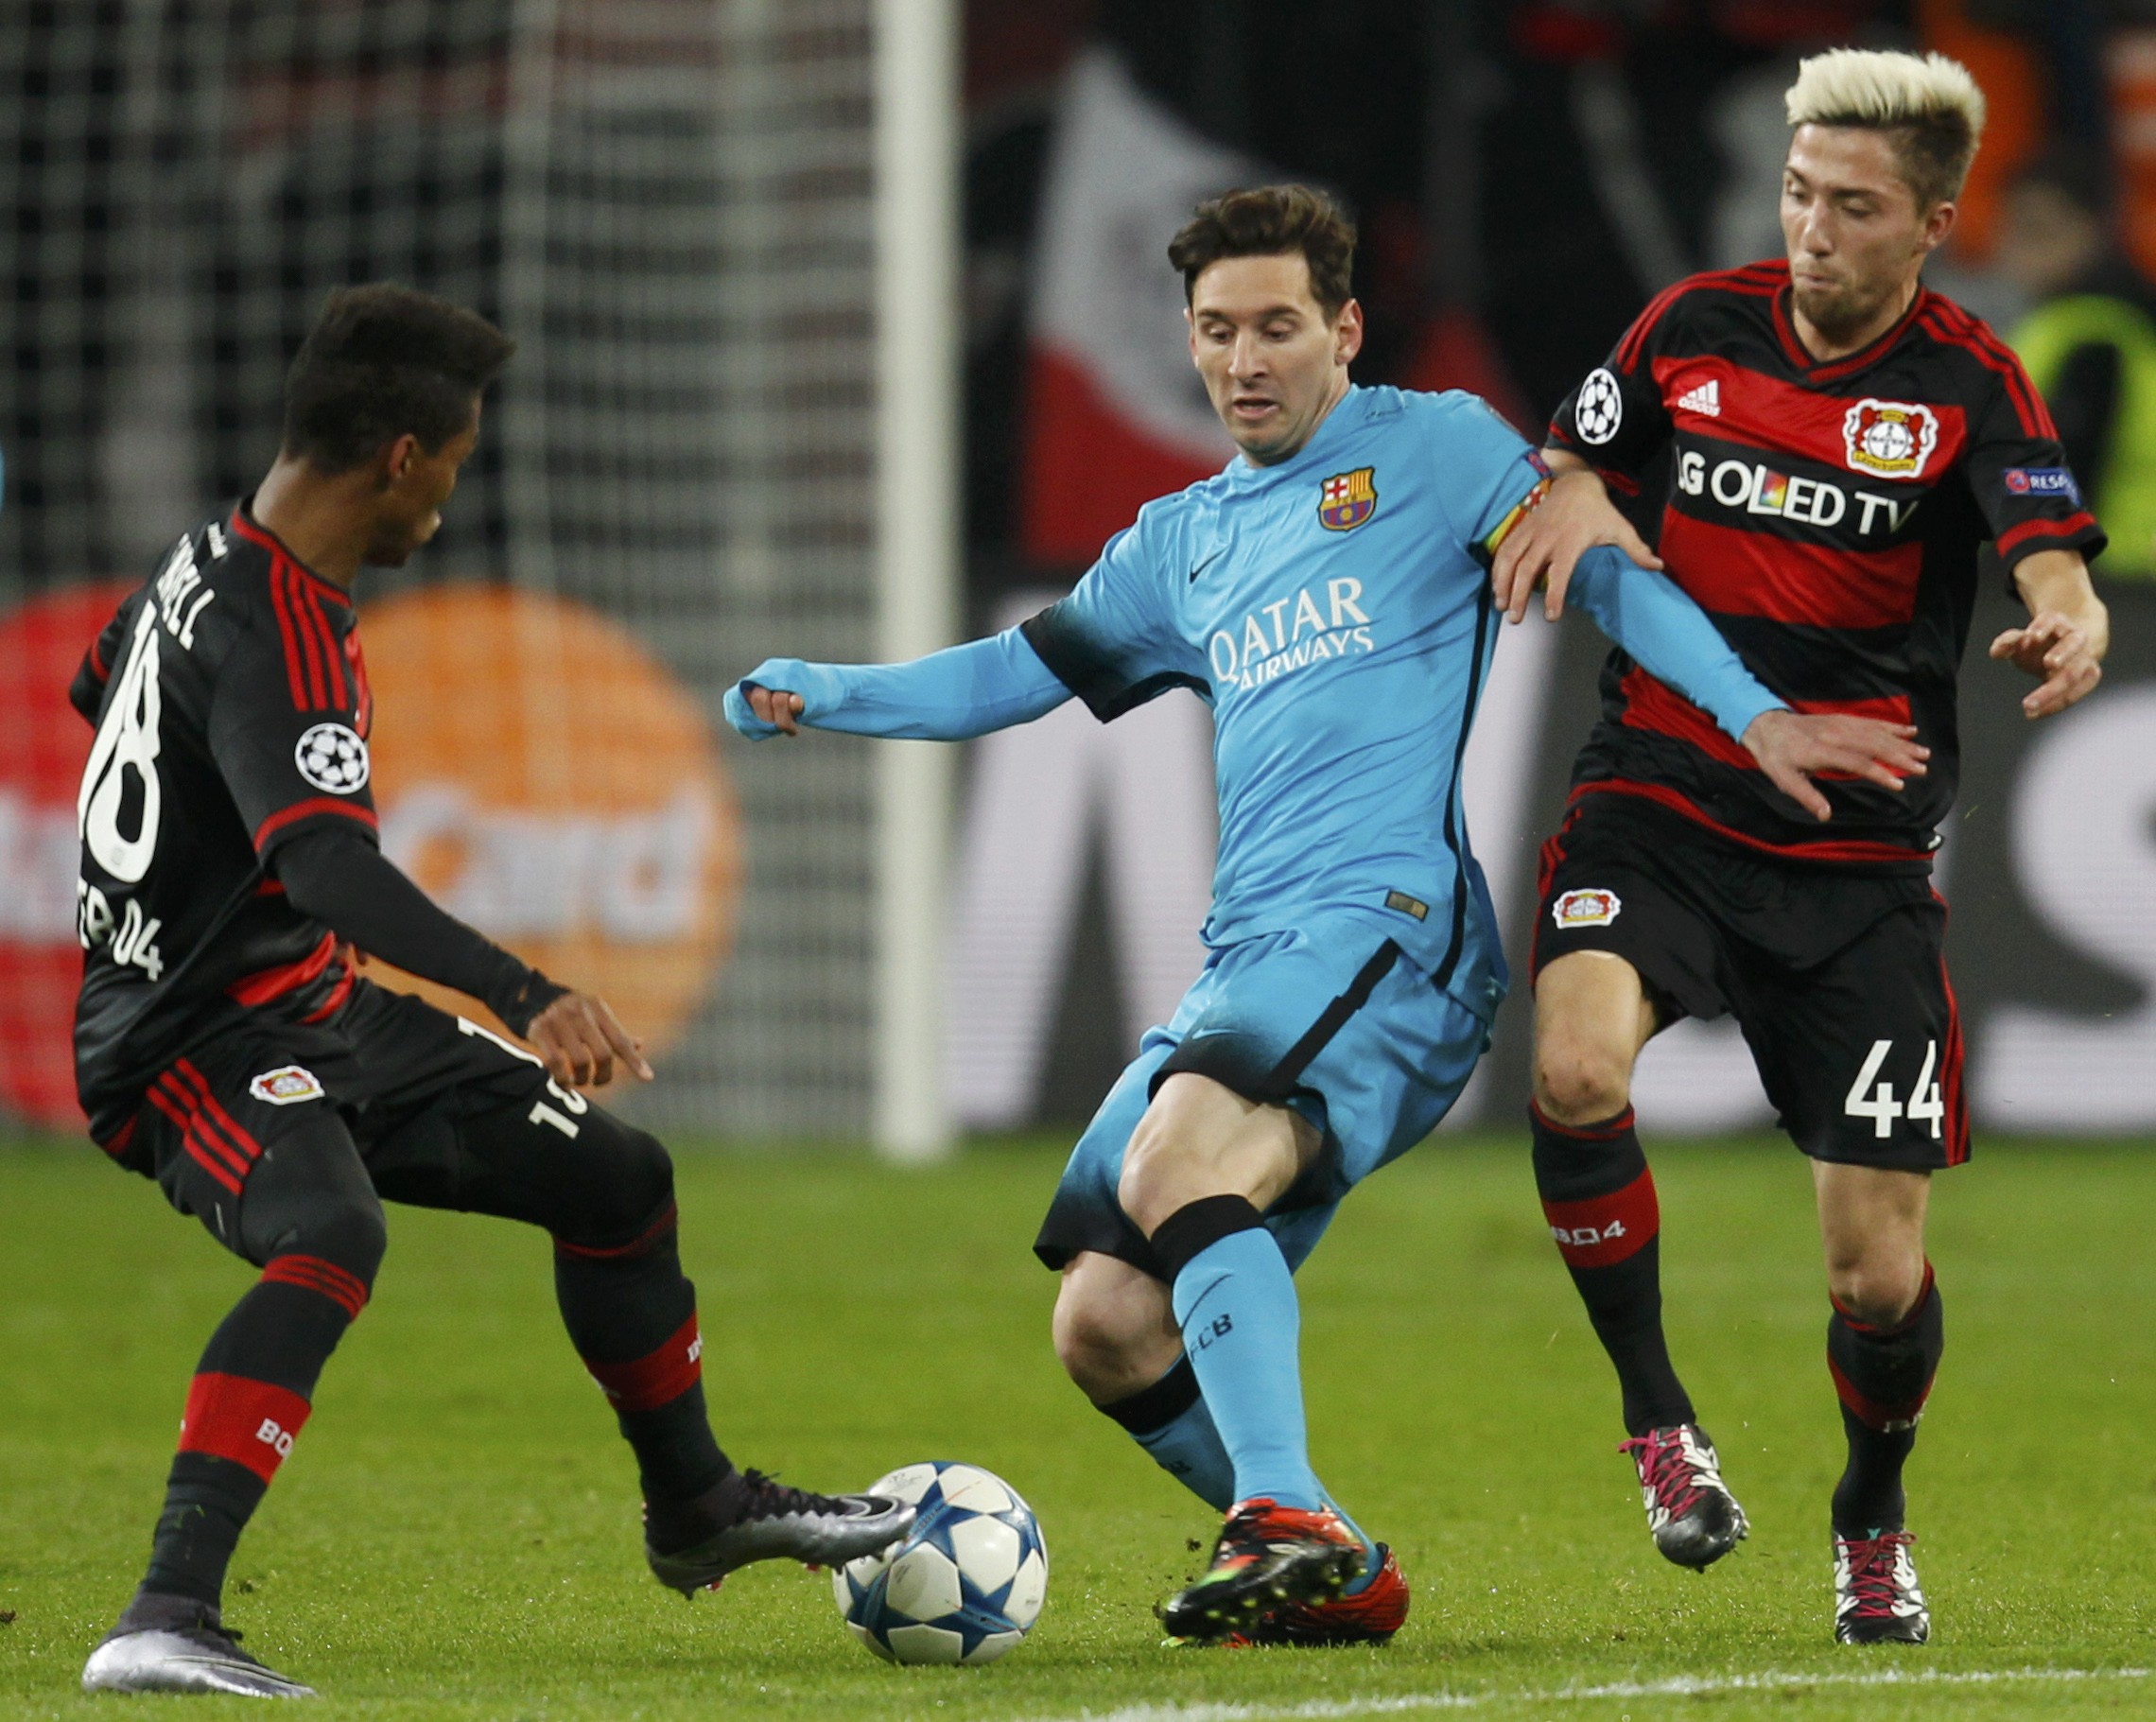 FC Barcelona's Lionel Messi and Bayer Leverkusen's Kevin Kampl and Wendell in action during UEFA Champions League game at Leverkusen on Wednesday, December 9, 2015. Photo: Reuters